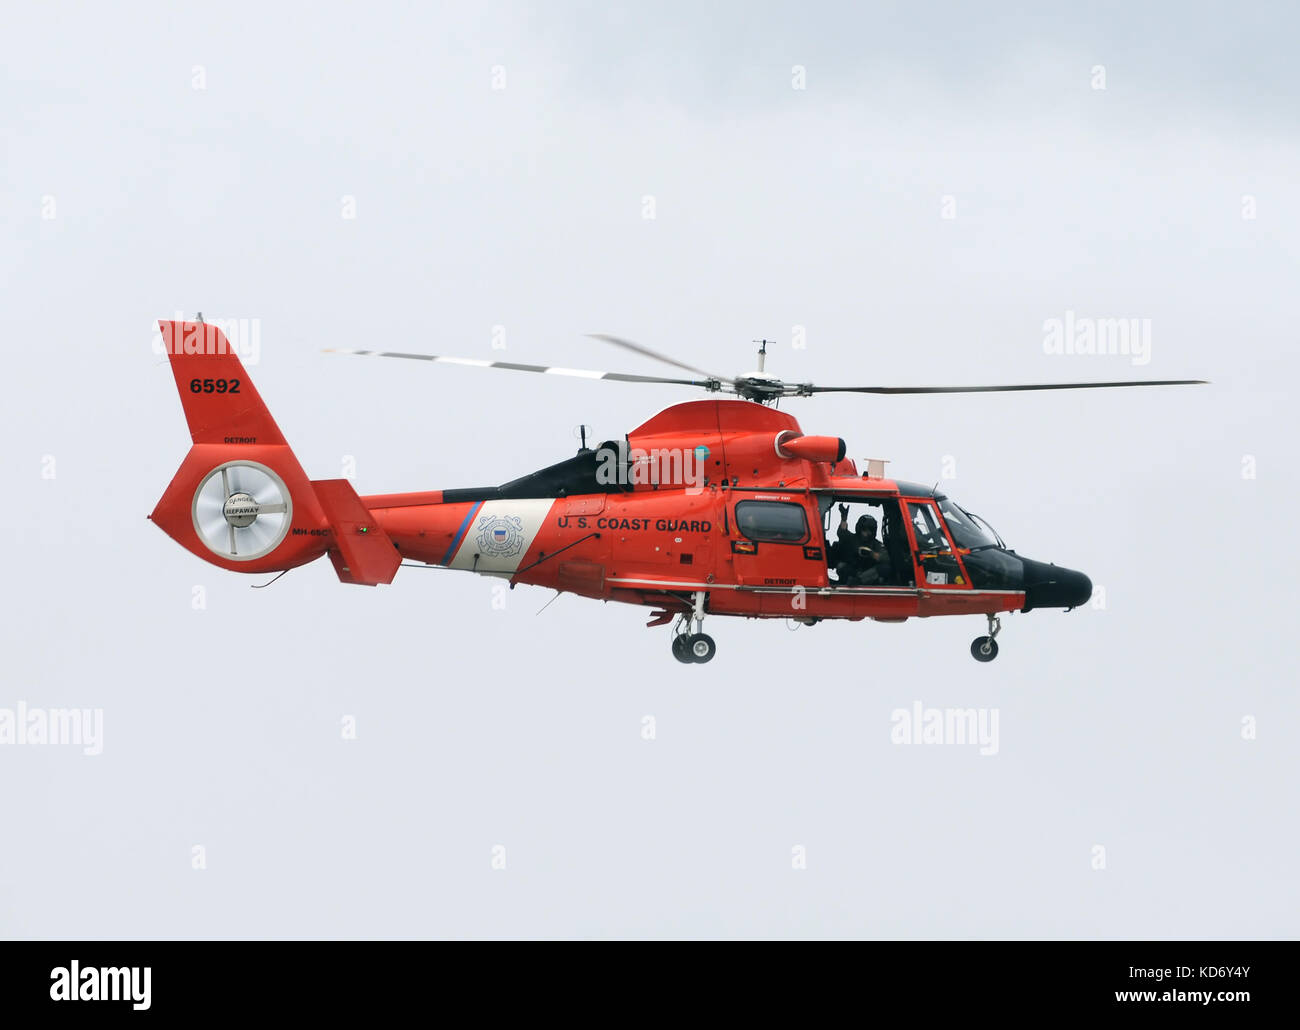 Detroit, USA - July 24, 2011: US Coast Guard helicopter departs on a patrol mission over the Great Lakes. The USCG covers large larts of the Canadian  Stock Photo